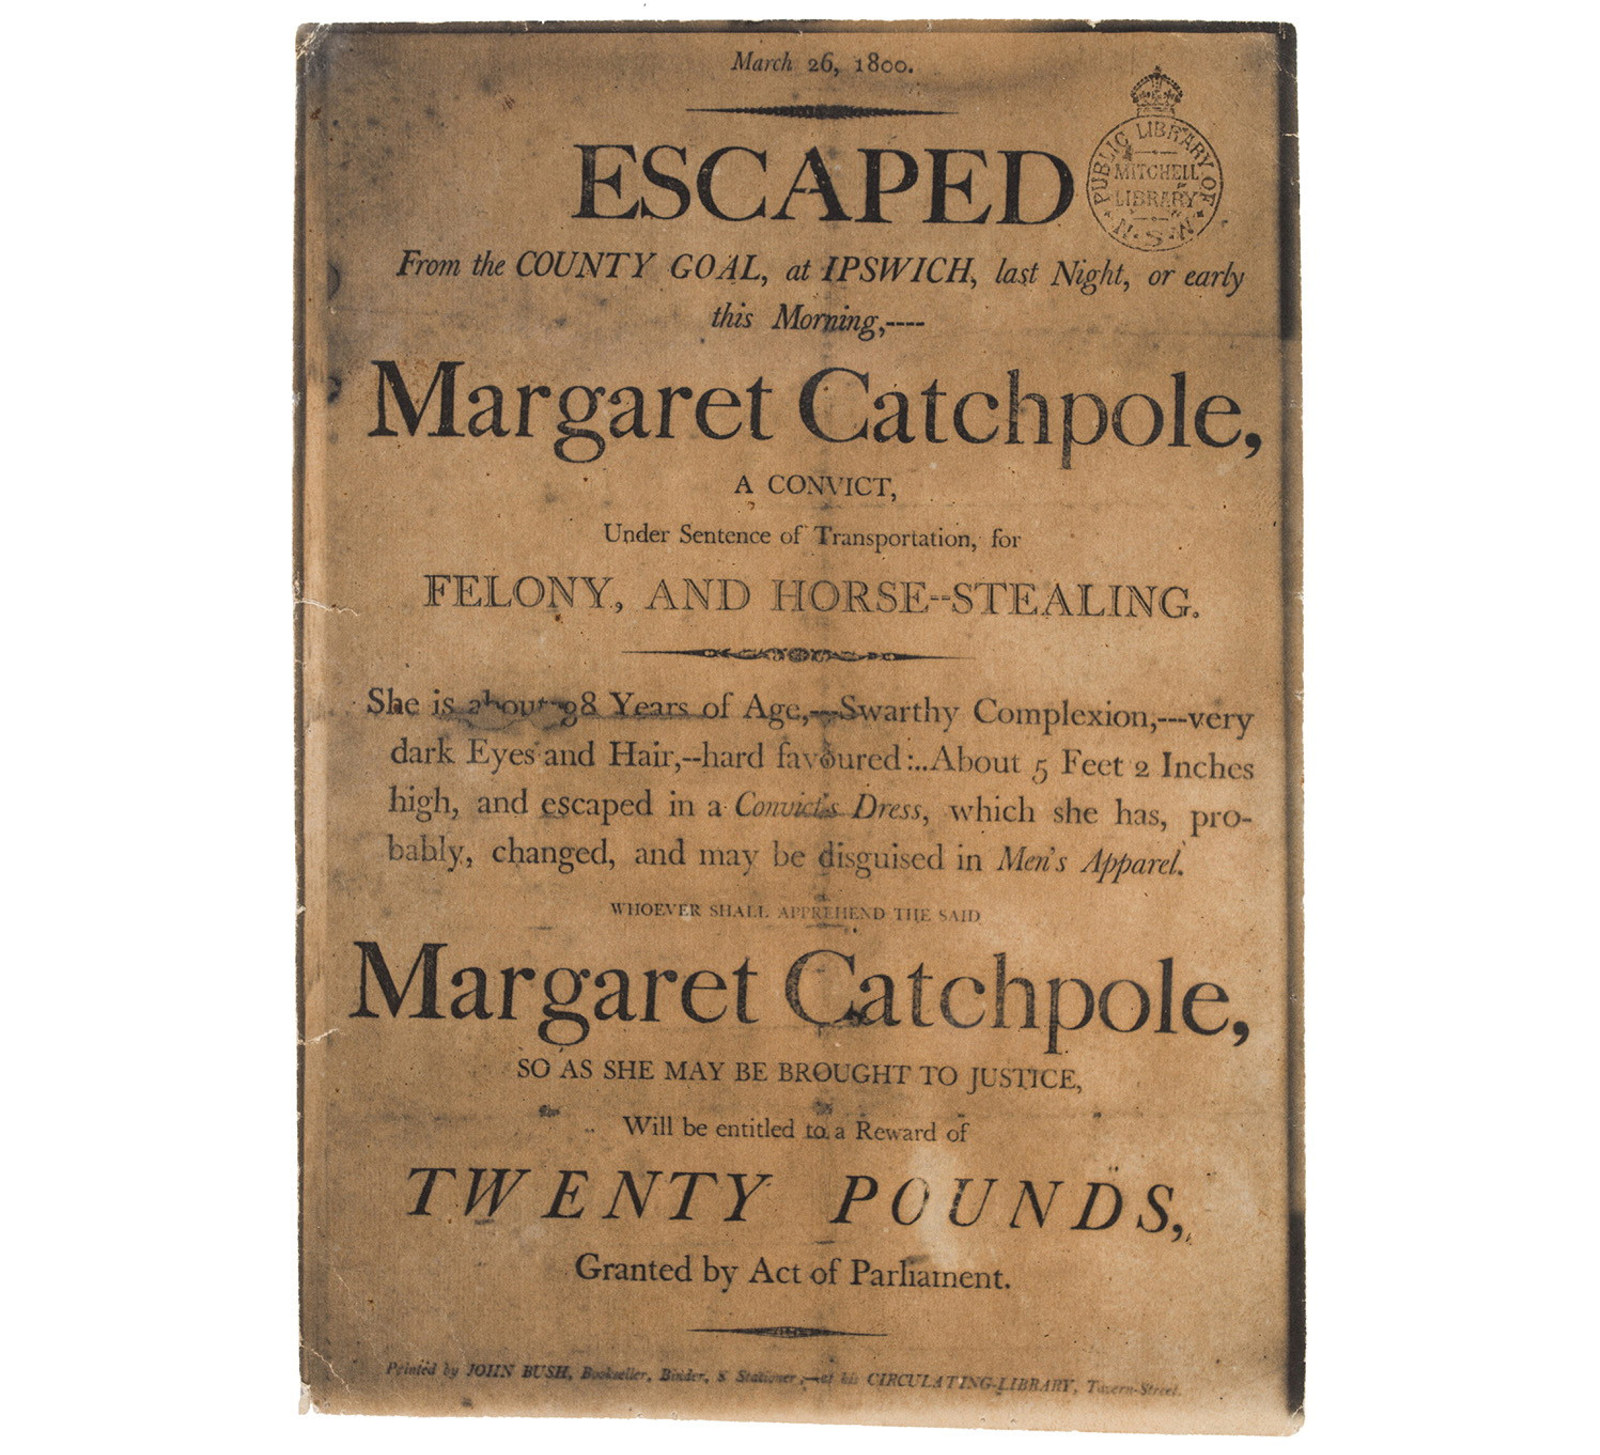 Handbill re Margaret Catchpole's escape from the County Gaol at Ipswich, Suffolk, 26 March 1800